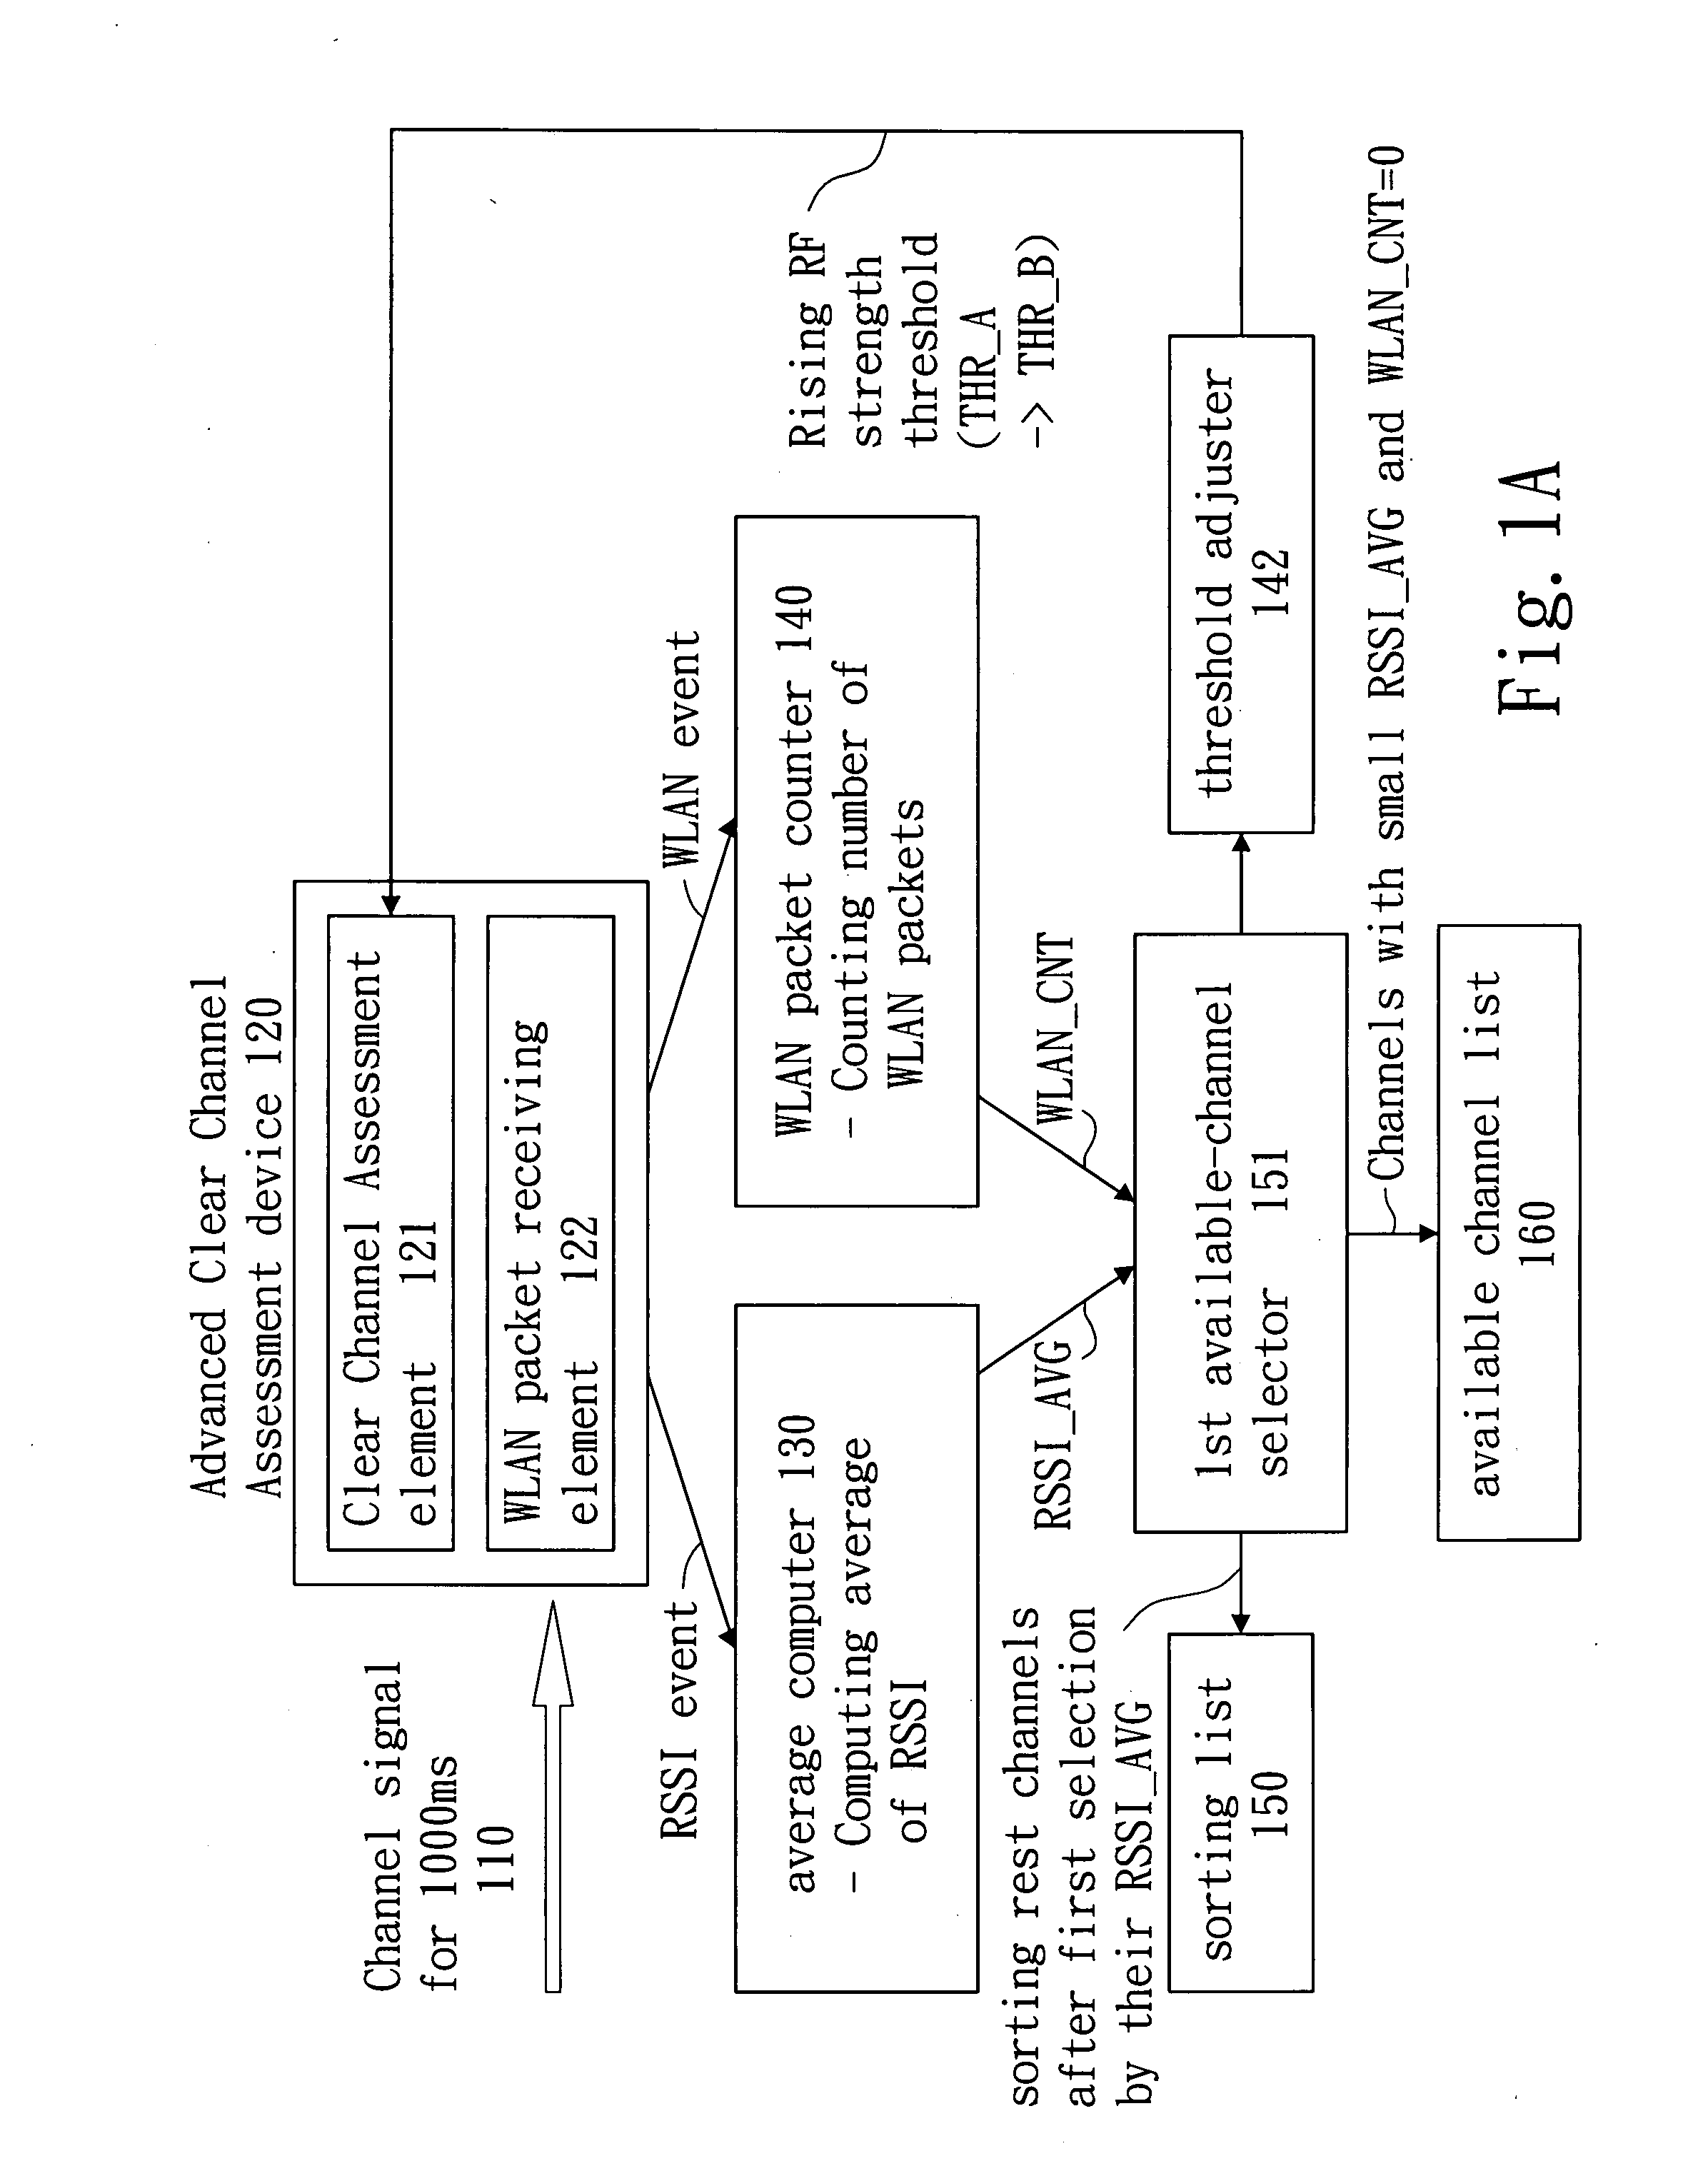 Cognitive radio system and method